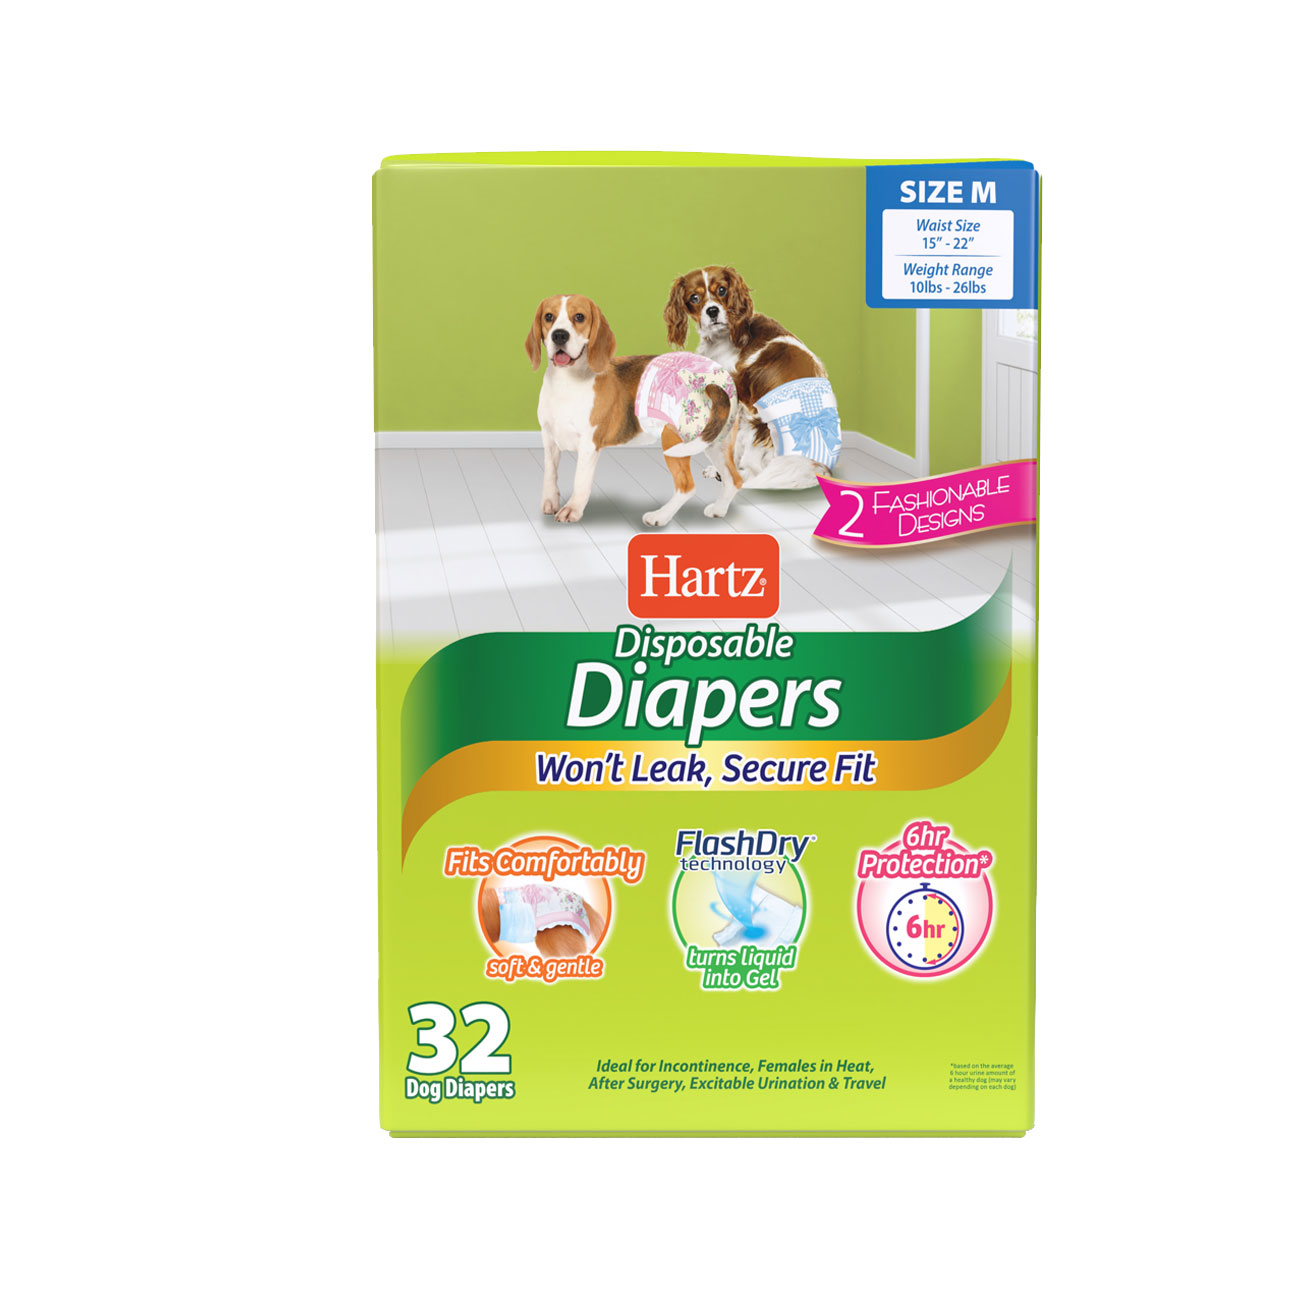 3270011243. Hartz disposable diapers. Front of package. Avoid unpleasant messes with Hartz disposable diapers. Medium diapers for dogs.